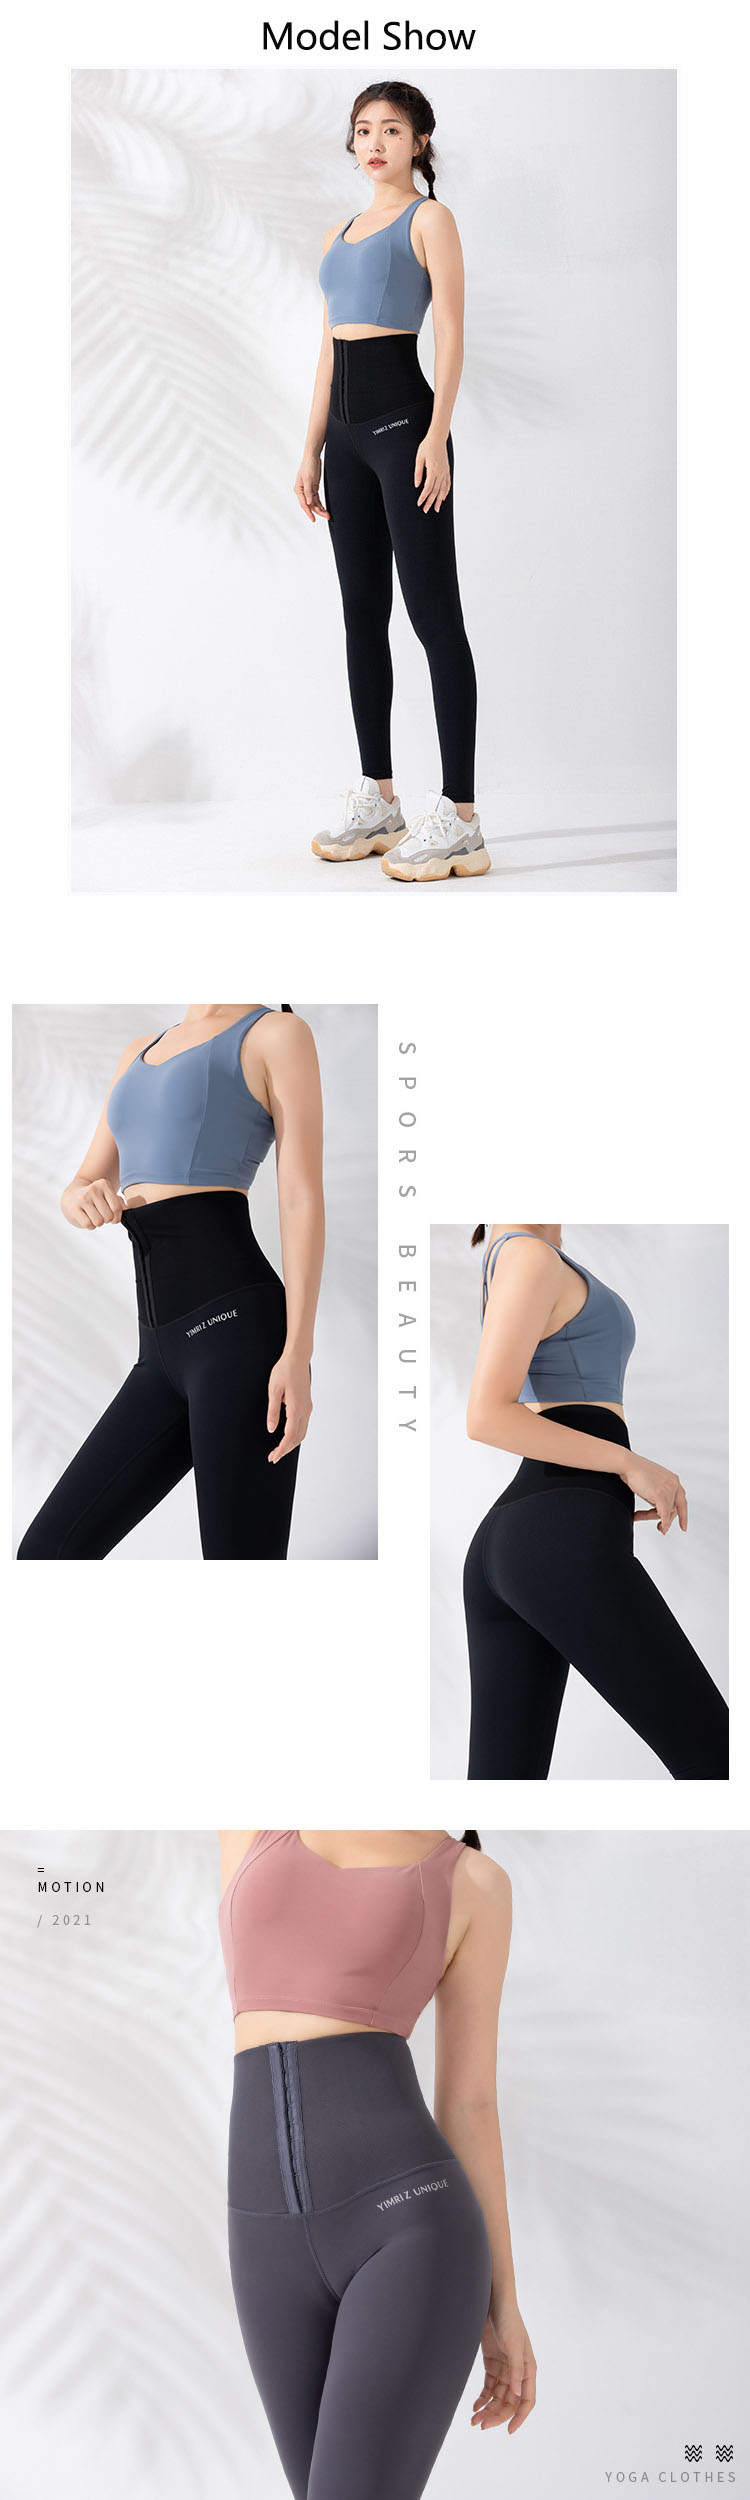 Gentle wrapping, comfortable fit, no burden for exercise.